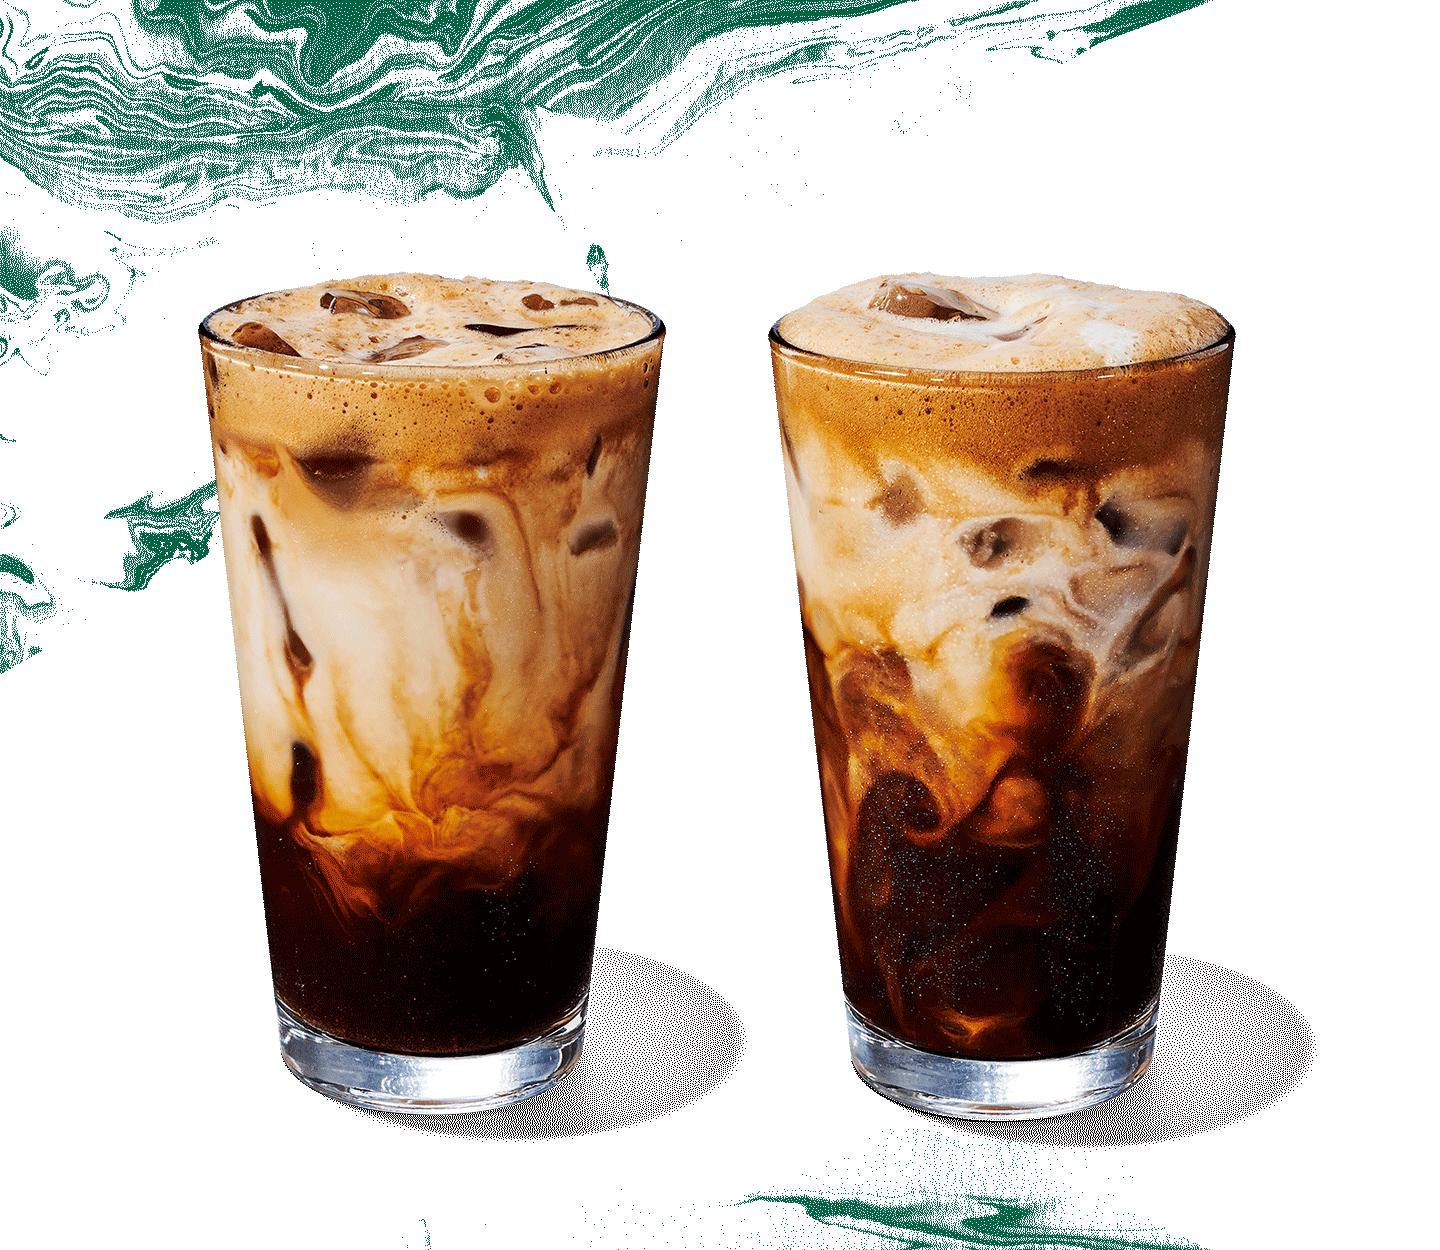 Two iced coffee drinks in tall glasses, dark at the bottom and marbled toward the top.